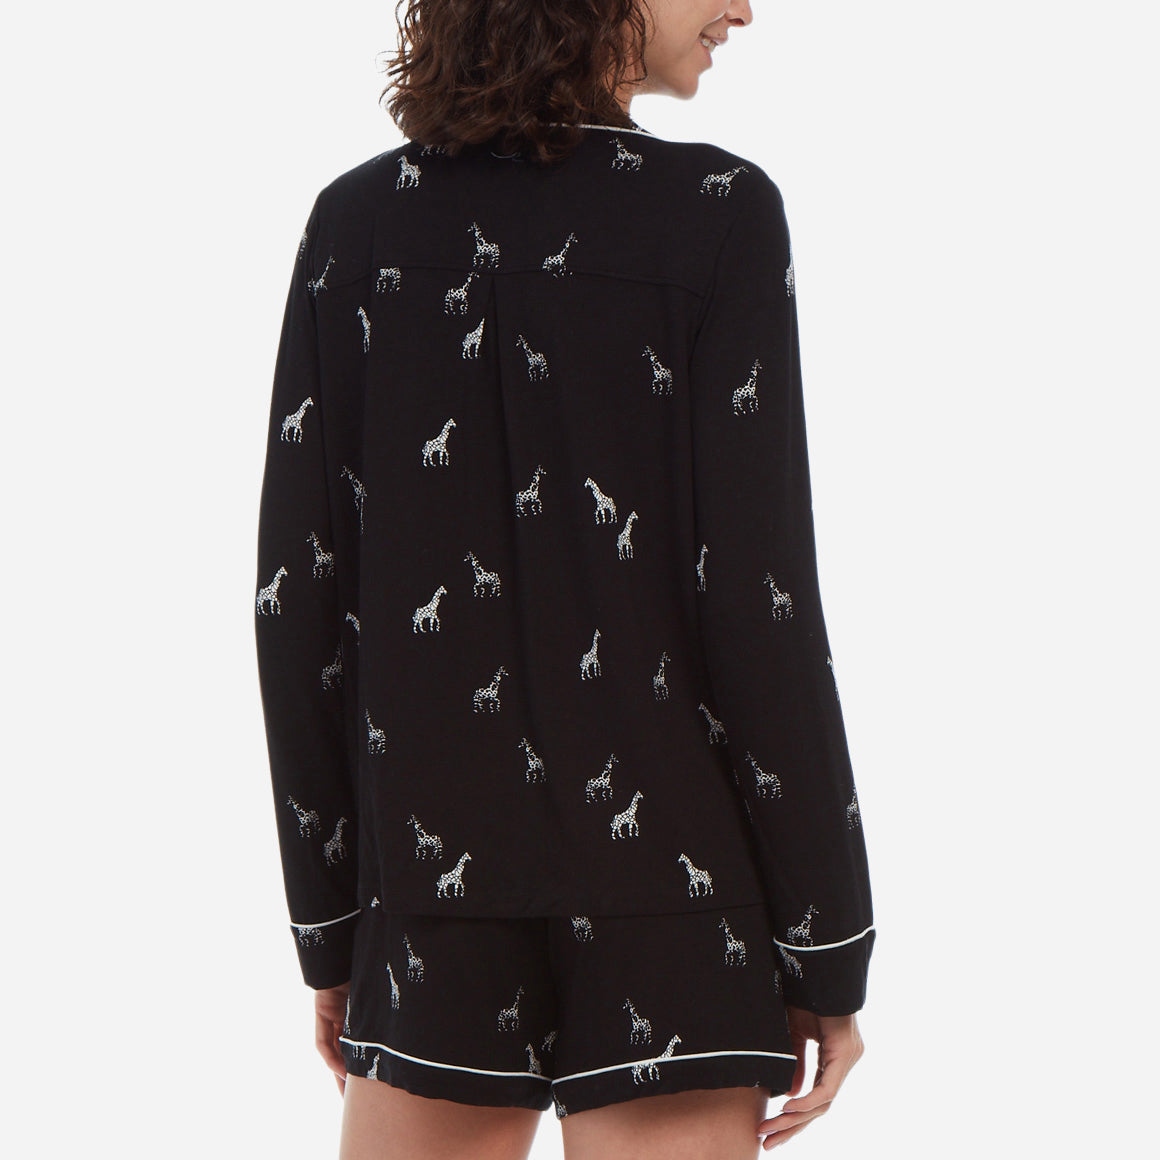 Back-facing female model is wearing a black long sleeve with shorts pj set. The set has a black and white giraffe print.